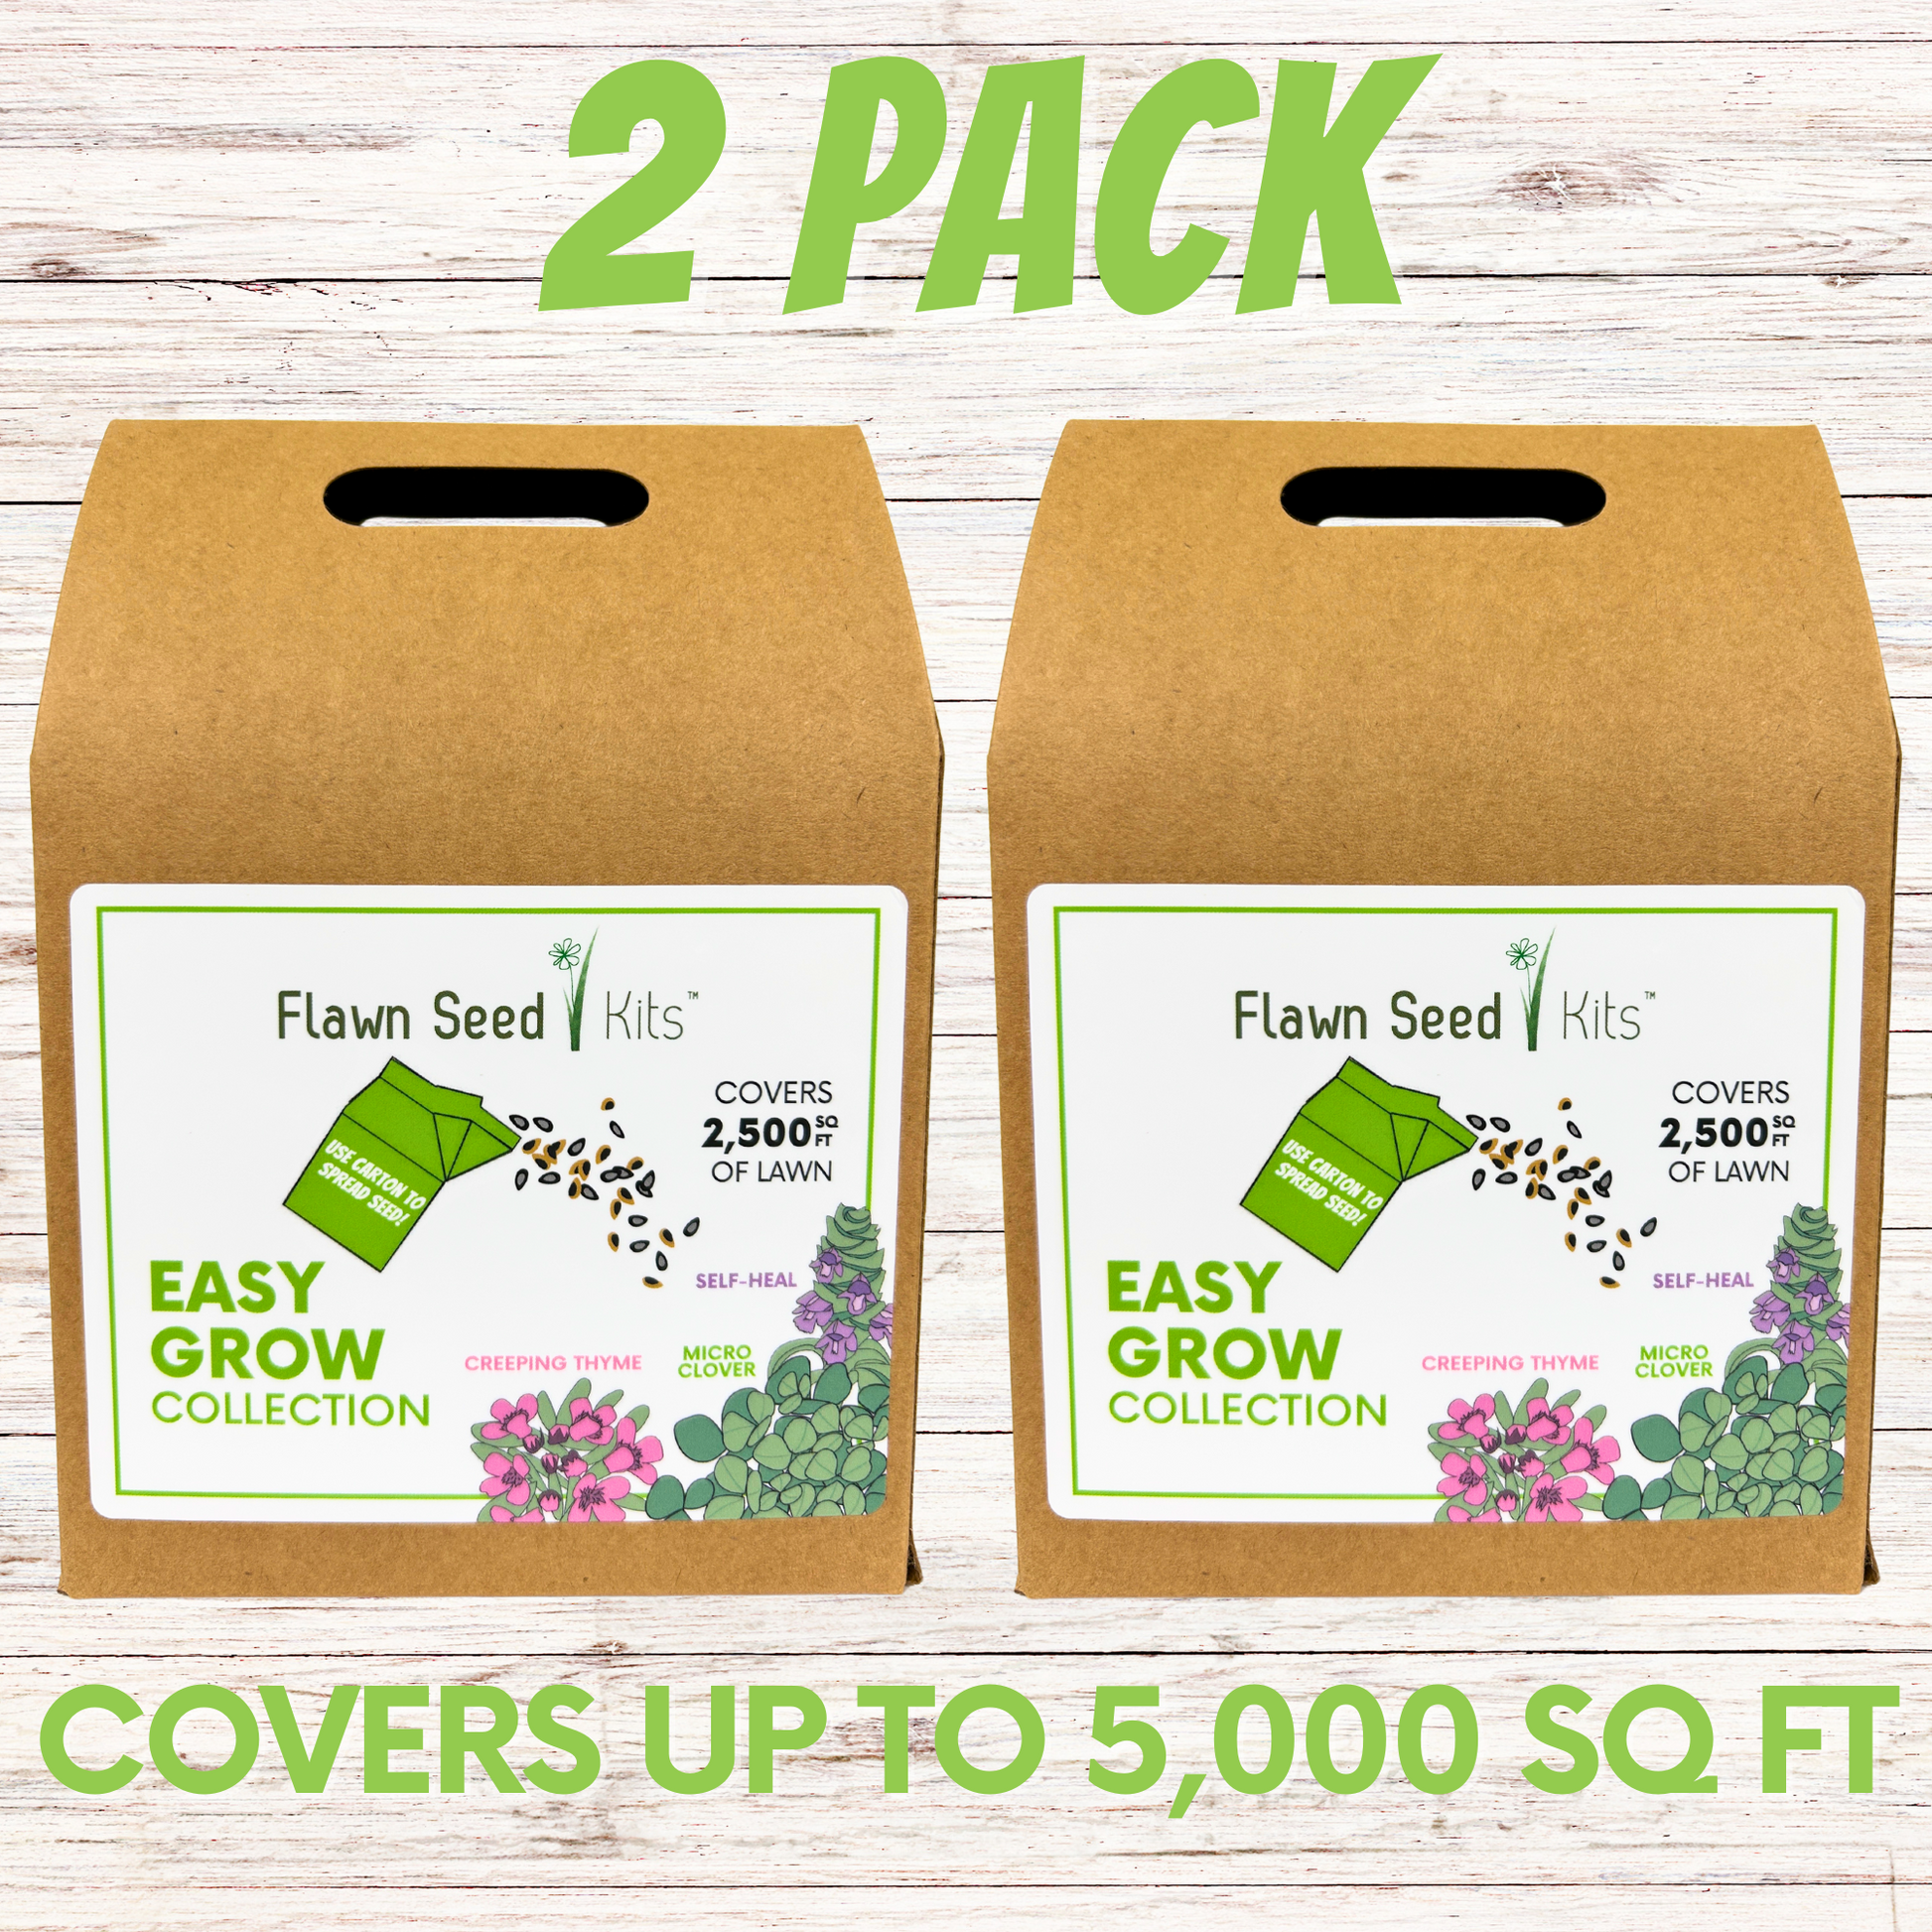 Micro Bee Lawn Flowering Pollinator Seed Kit, Micro Clover, Self-Heal, Creeping Thyme, Easy Spread Container 2 Pack Covers 5,000 square feet